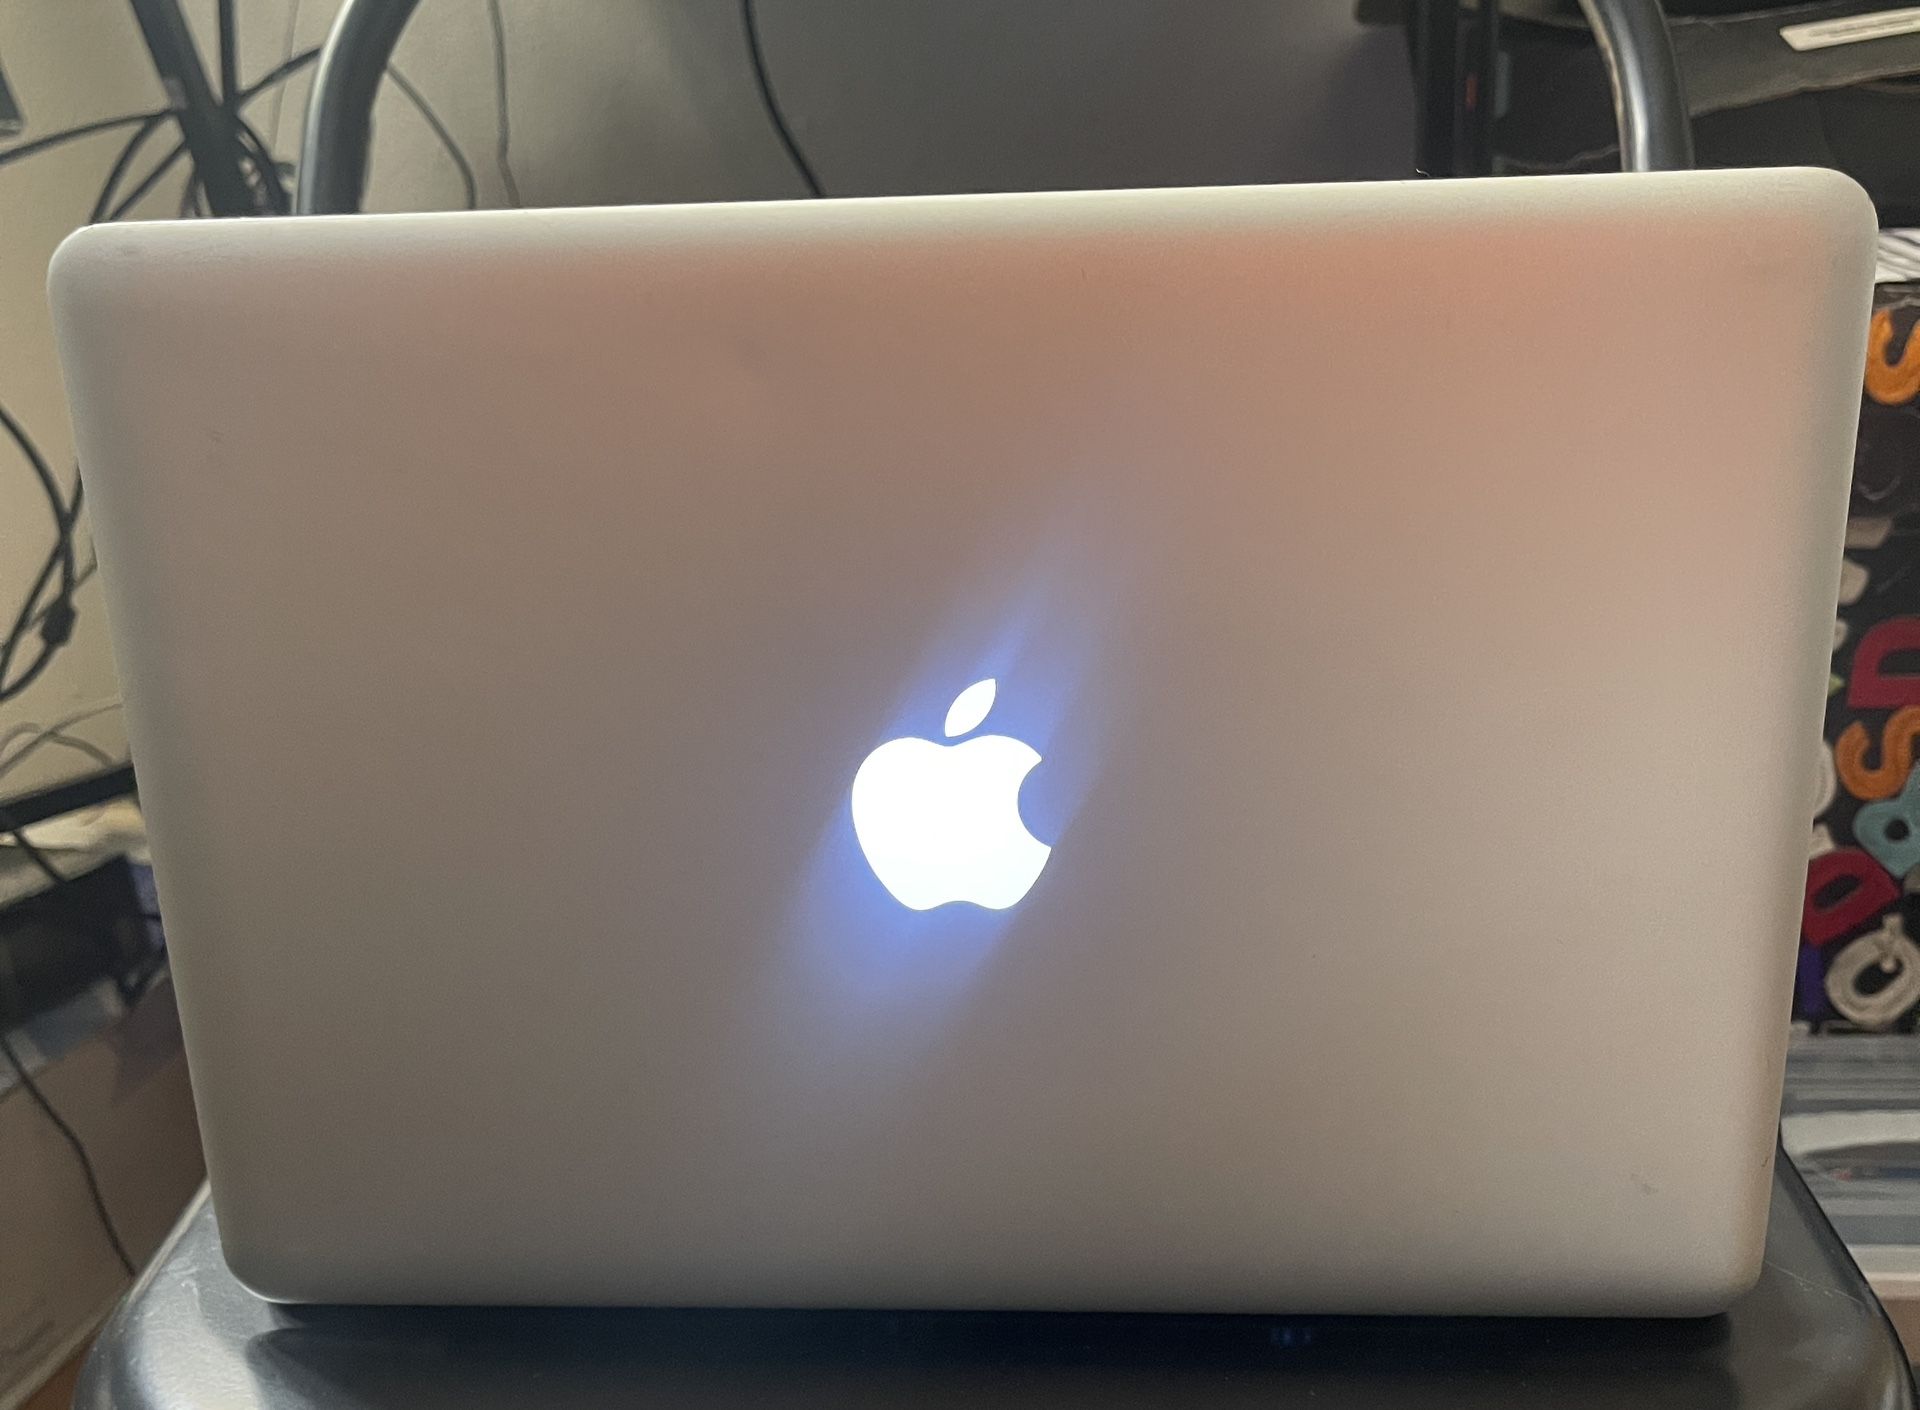 Macbook Pro 2012 Mid 2012 13 Inch 2.5 Ghz I5 8 GB Ram and 251  GB Hard Driver wirh Charged